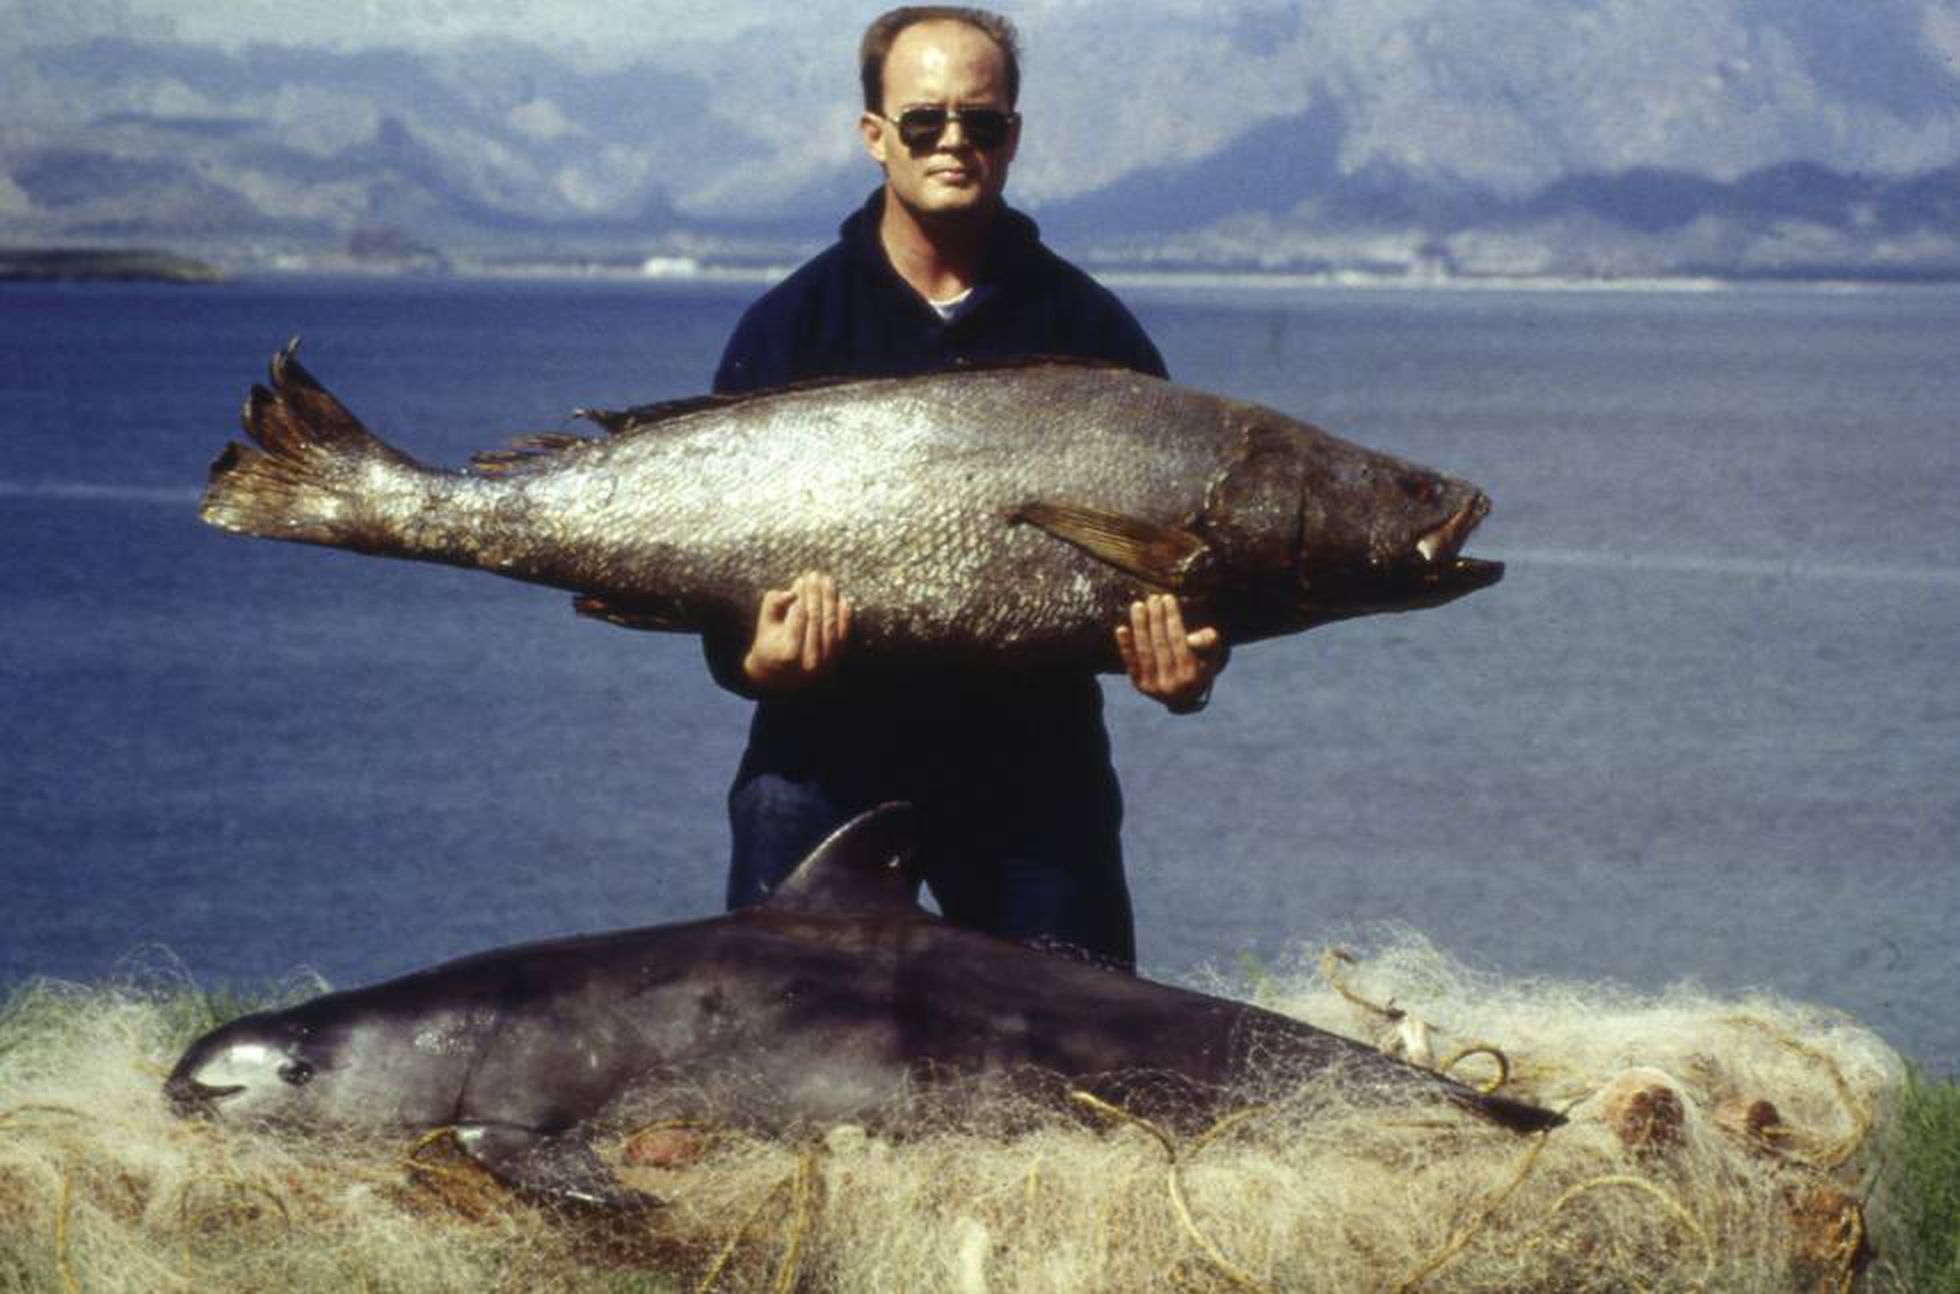 In the photo, a totoaba, and its collateral damage, a vaquita in the net.